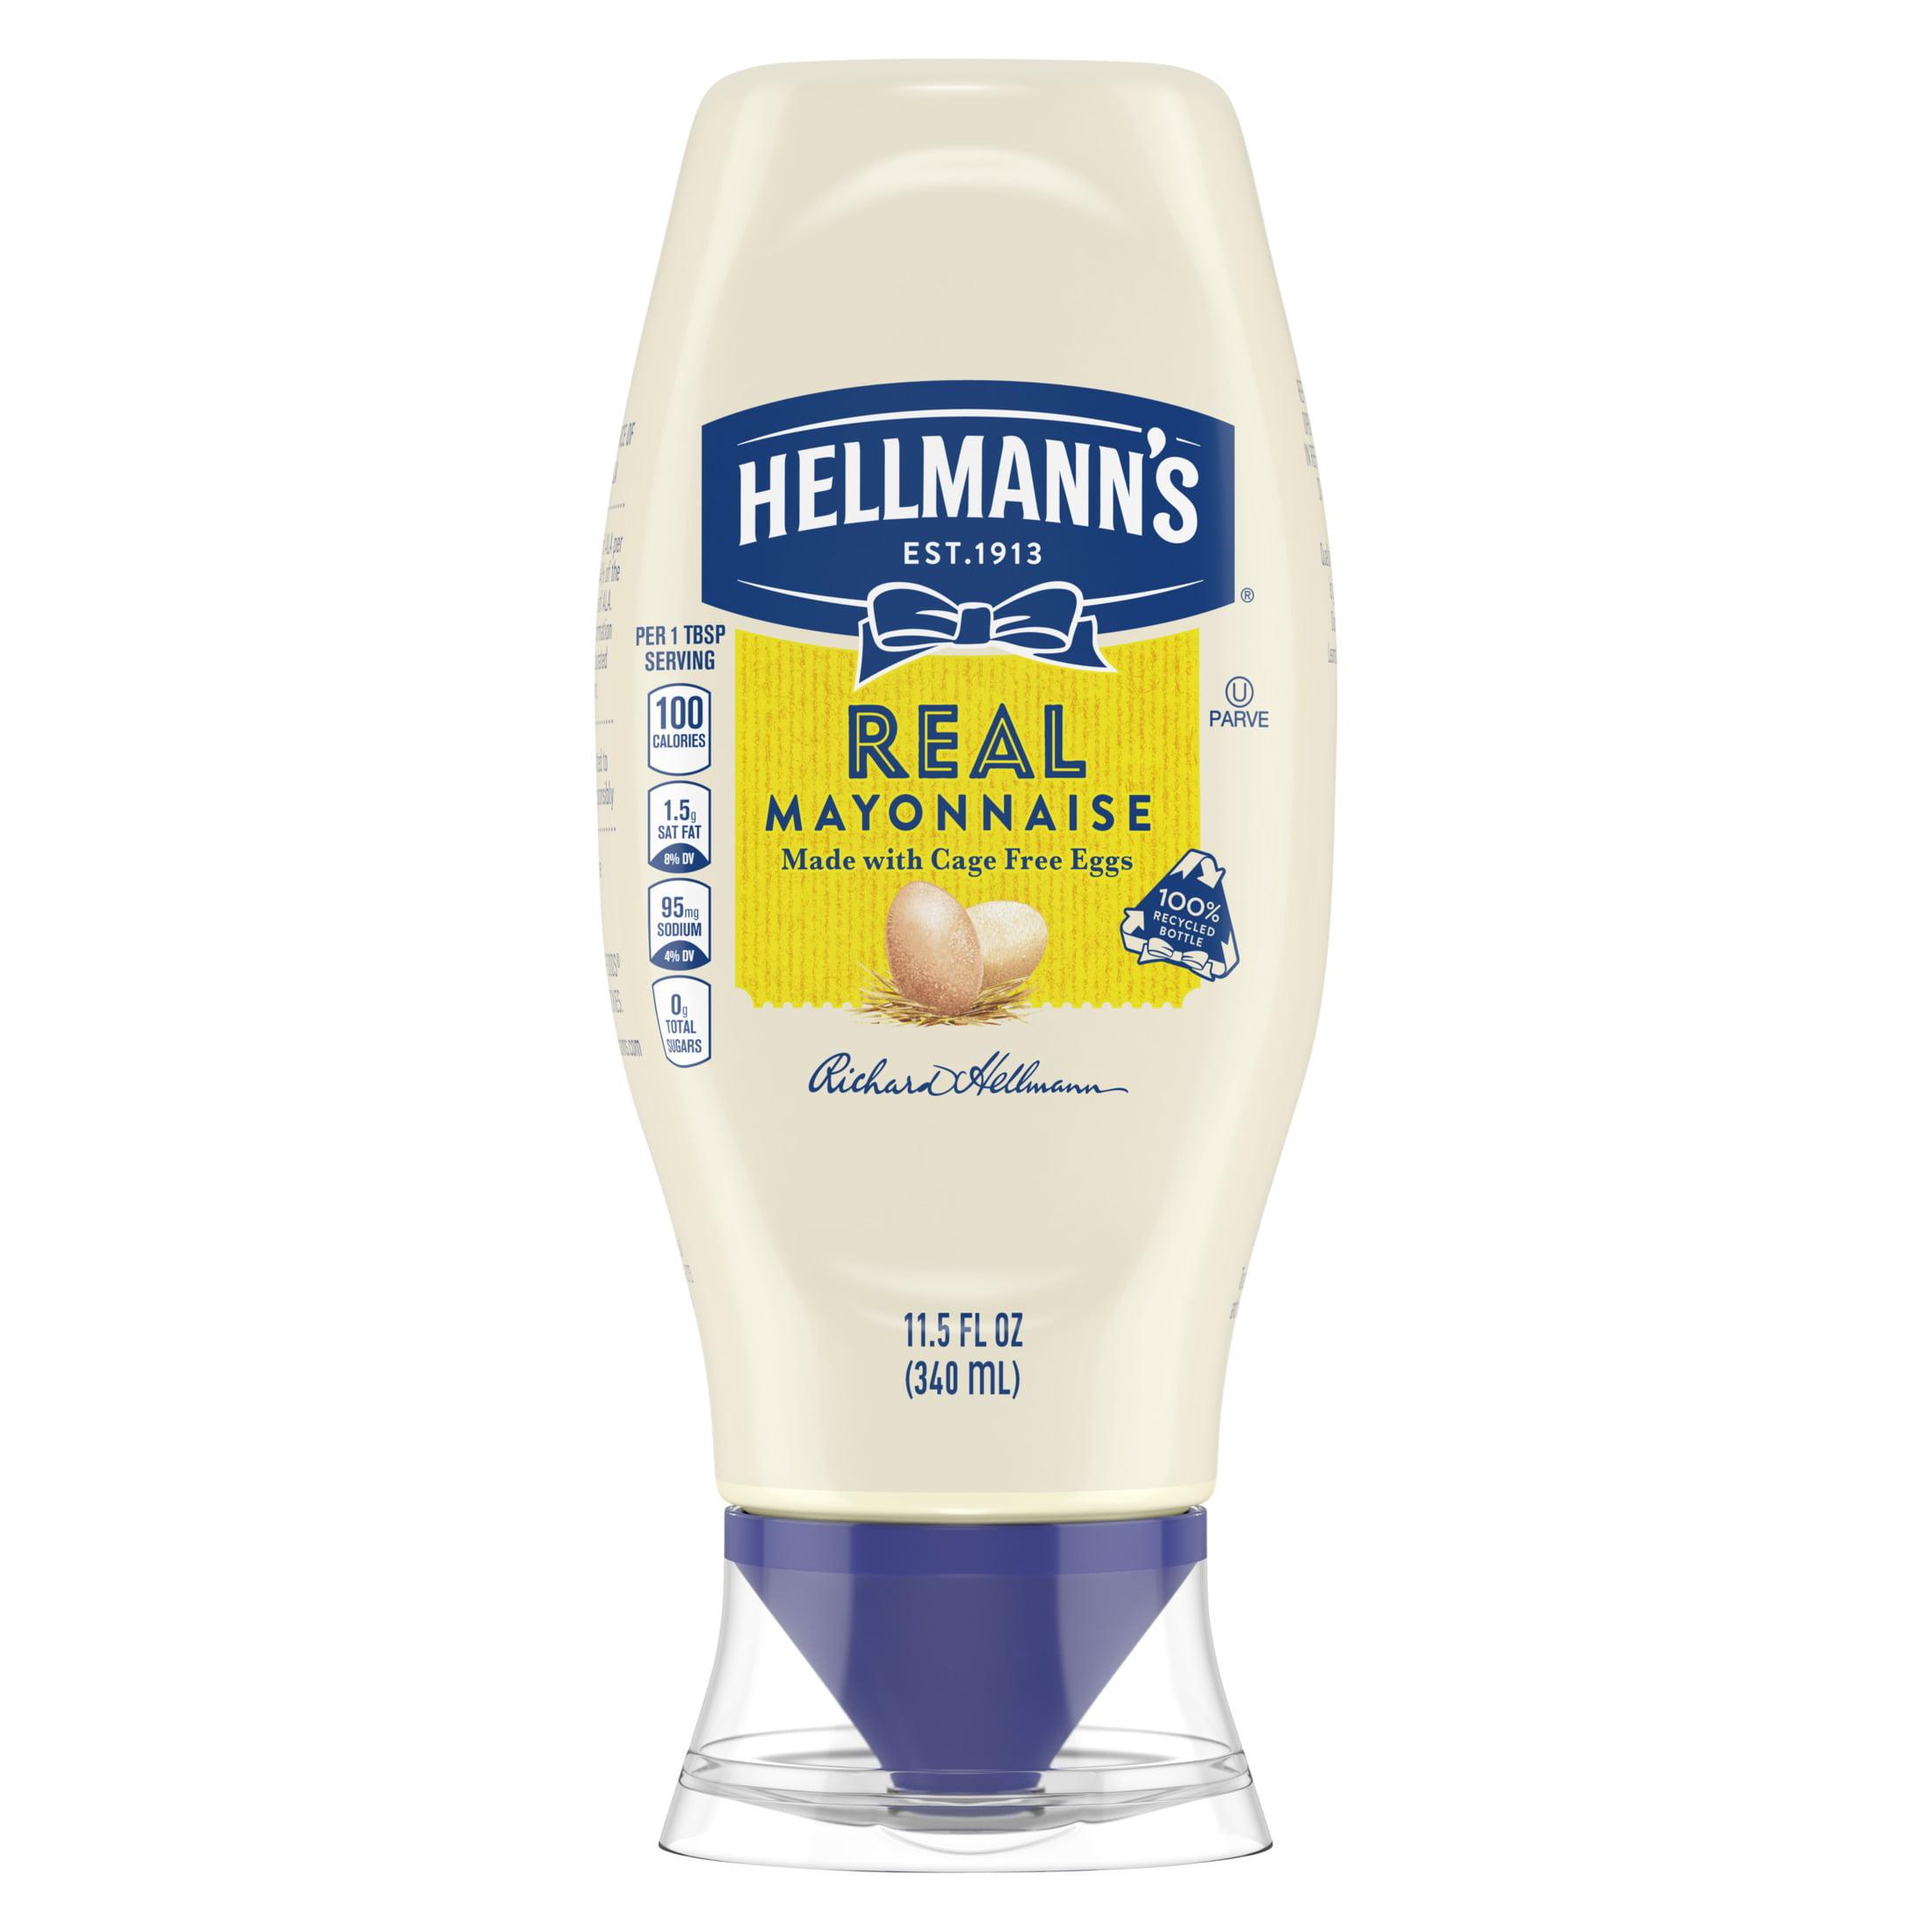 Hellmann's Made with Cage Free Eggs Real Mayonnaise, 11.5 fl oz Bottle, Size: 11.5 oz